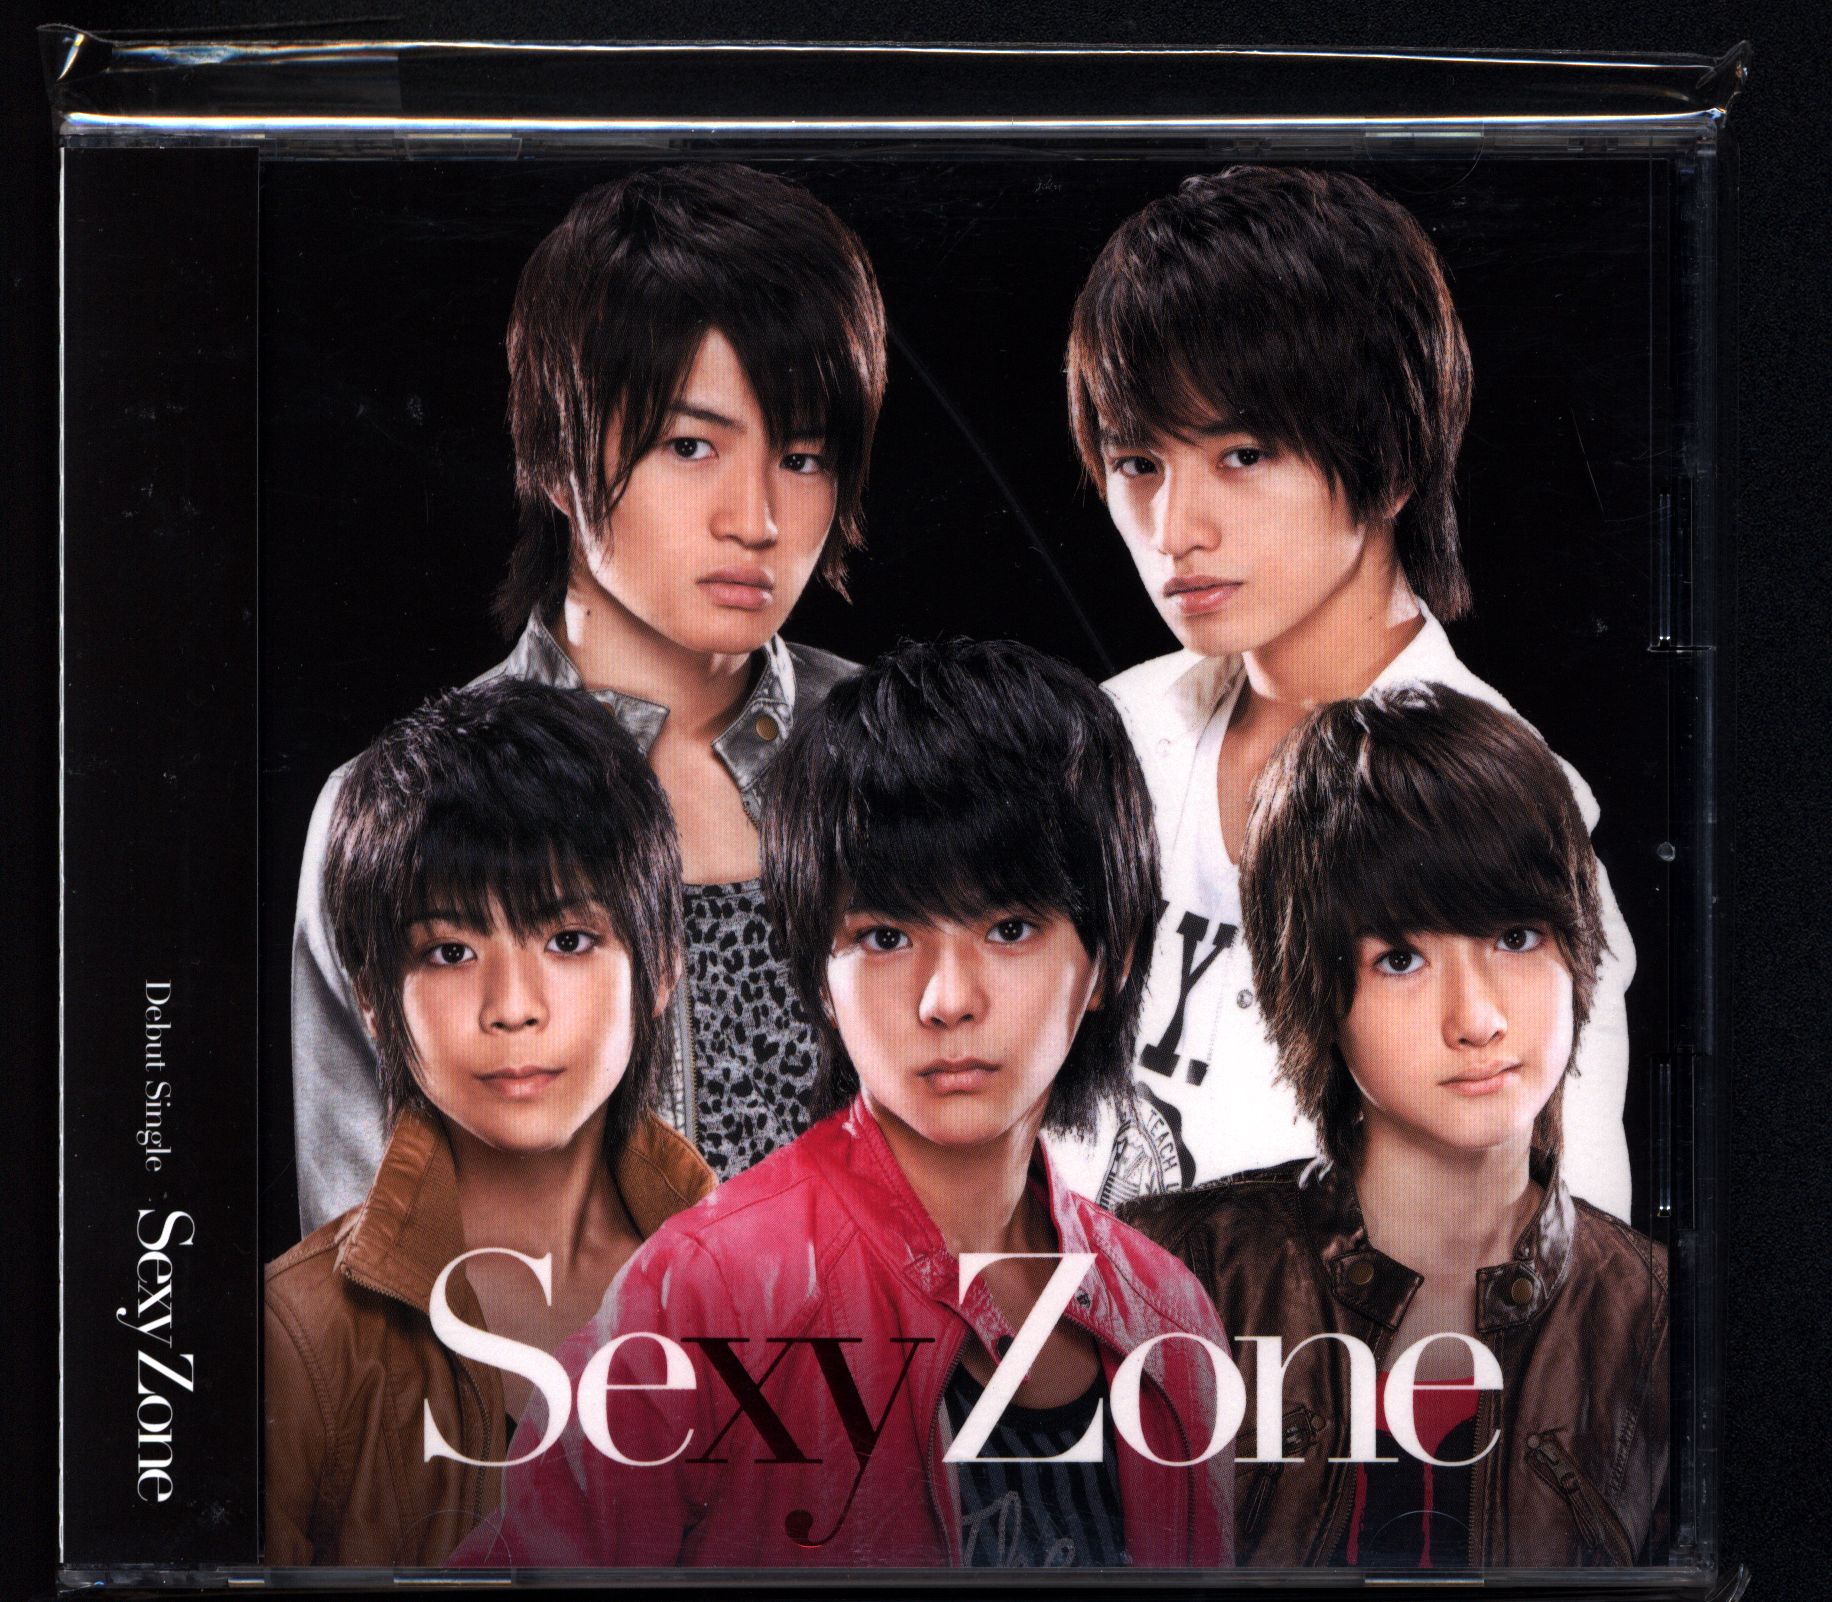 Sexy Zone Sexy Zone First Edition Limited Ed Disc B *CD + DVD